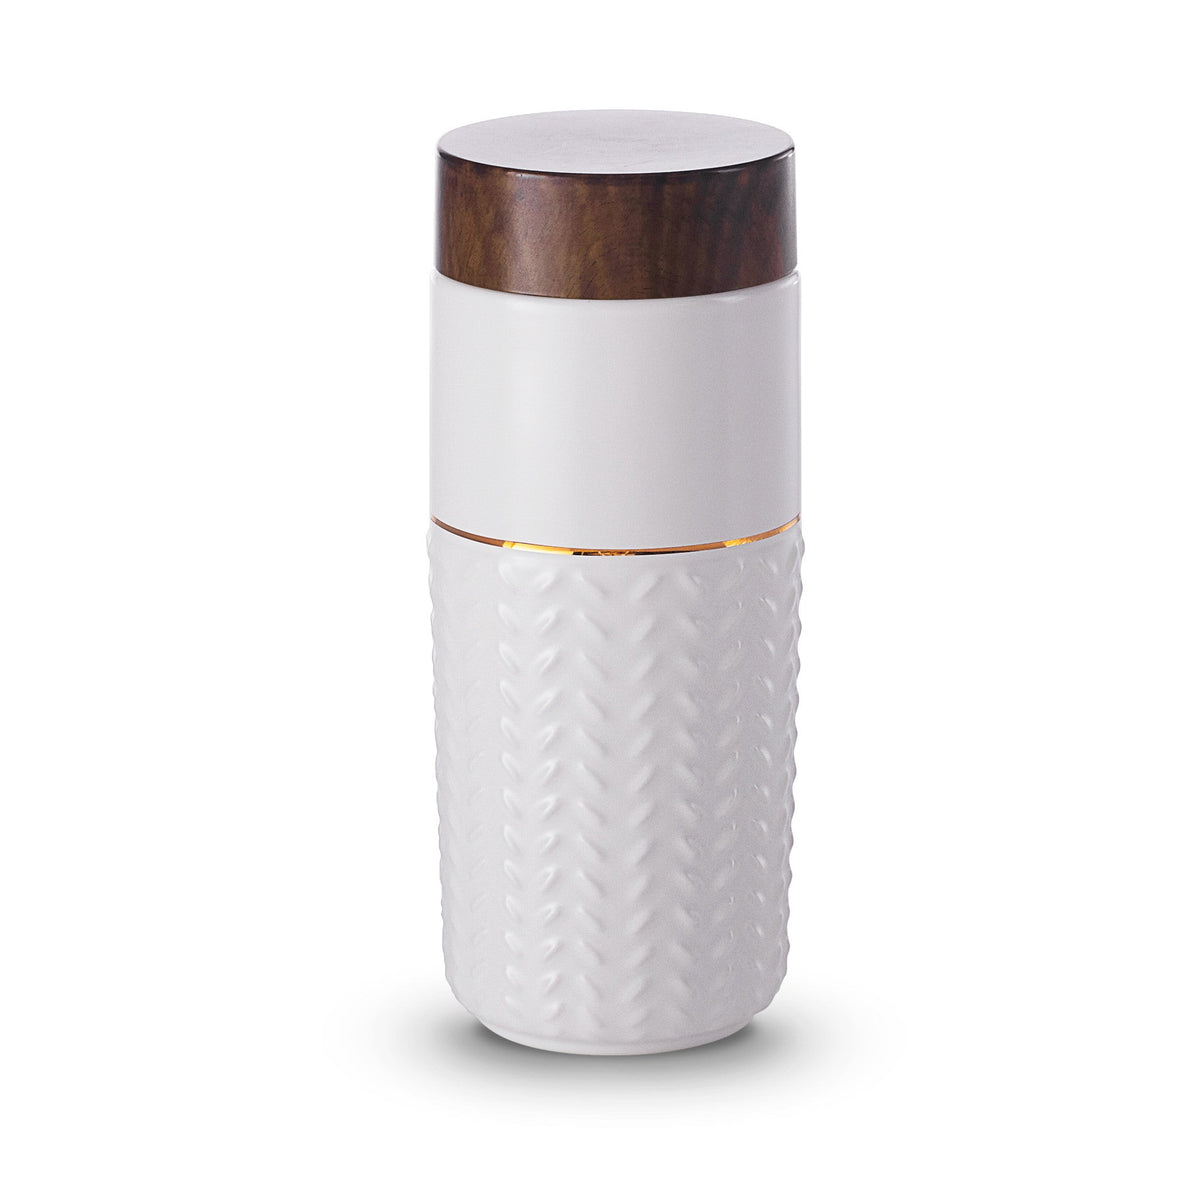 One-O-One - Flying to the Clouds Gold Ceramic Tumbler 12.3 oz-1